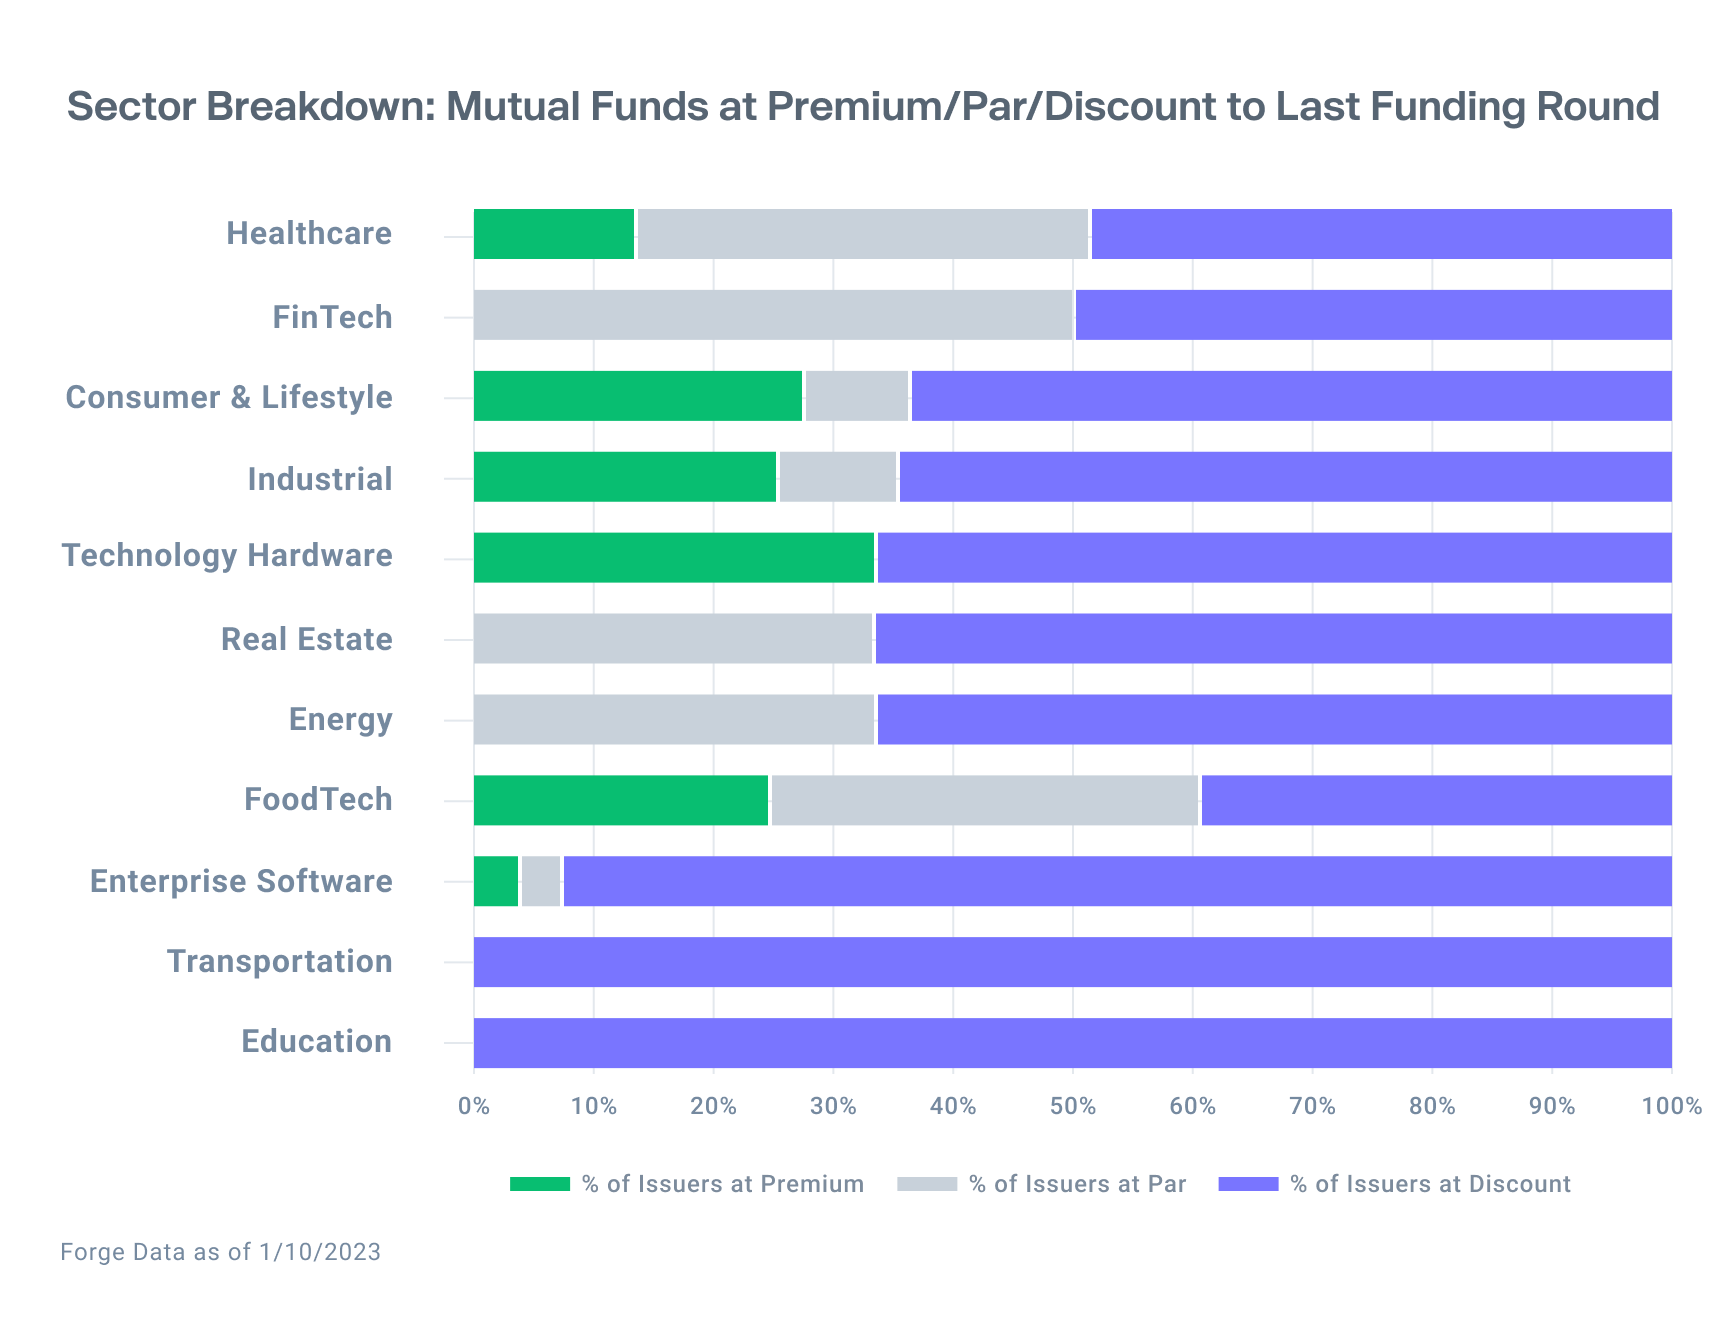 Graph shows distribution of Mutual Fund Marks by sector from Forge Data